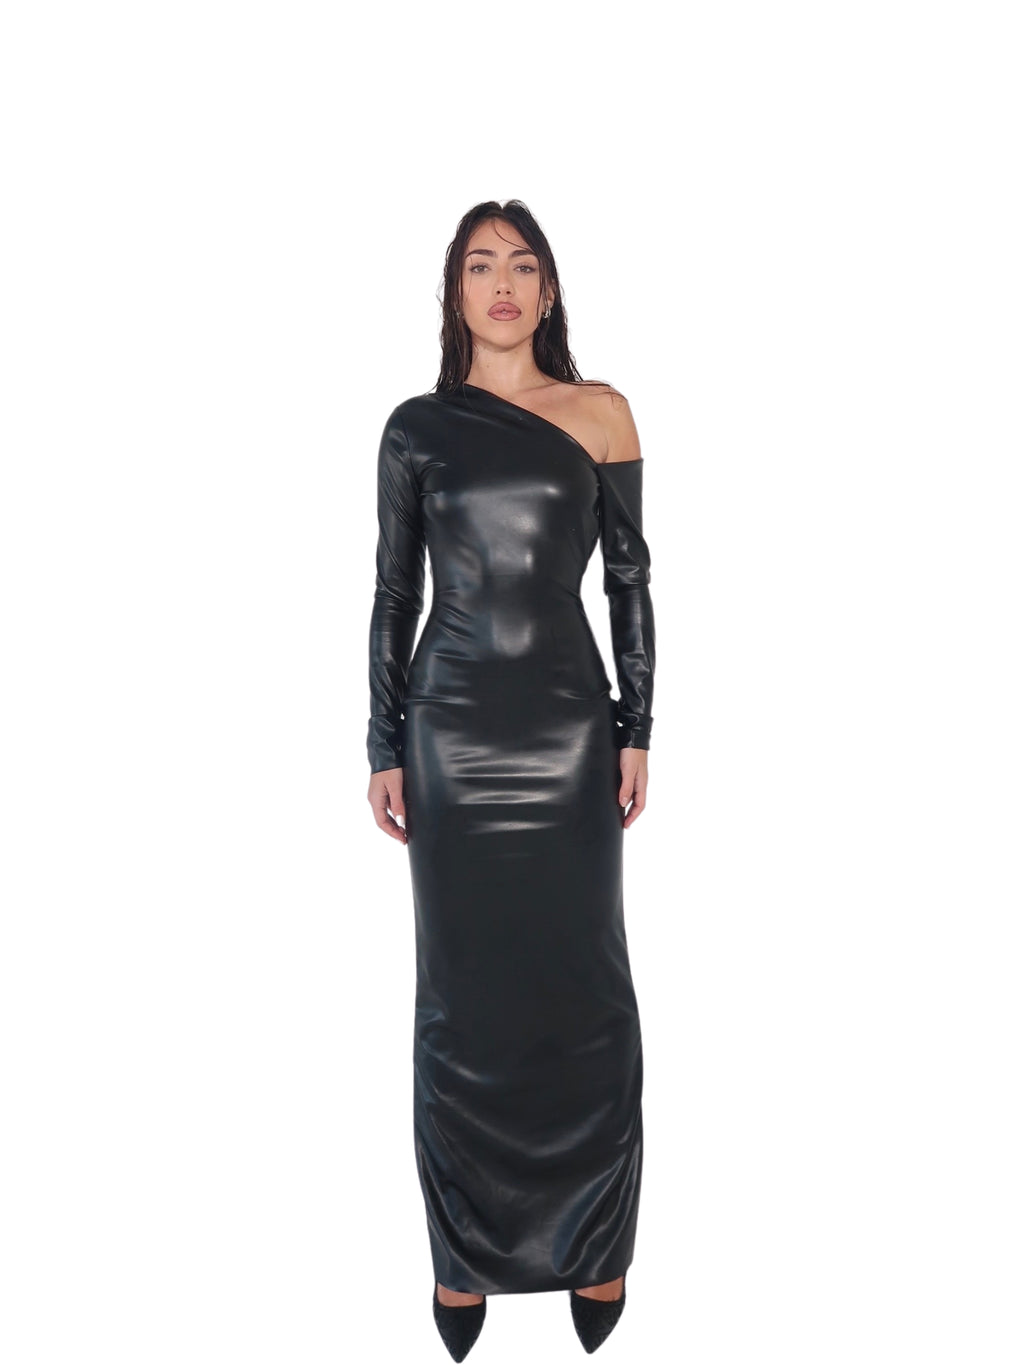 LEATHER OFF-THE-SHOULDER DRESS WITH ASYMMETRIC OPEN BACK DETAIL - SIREN THE BRAND